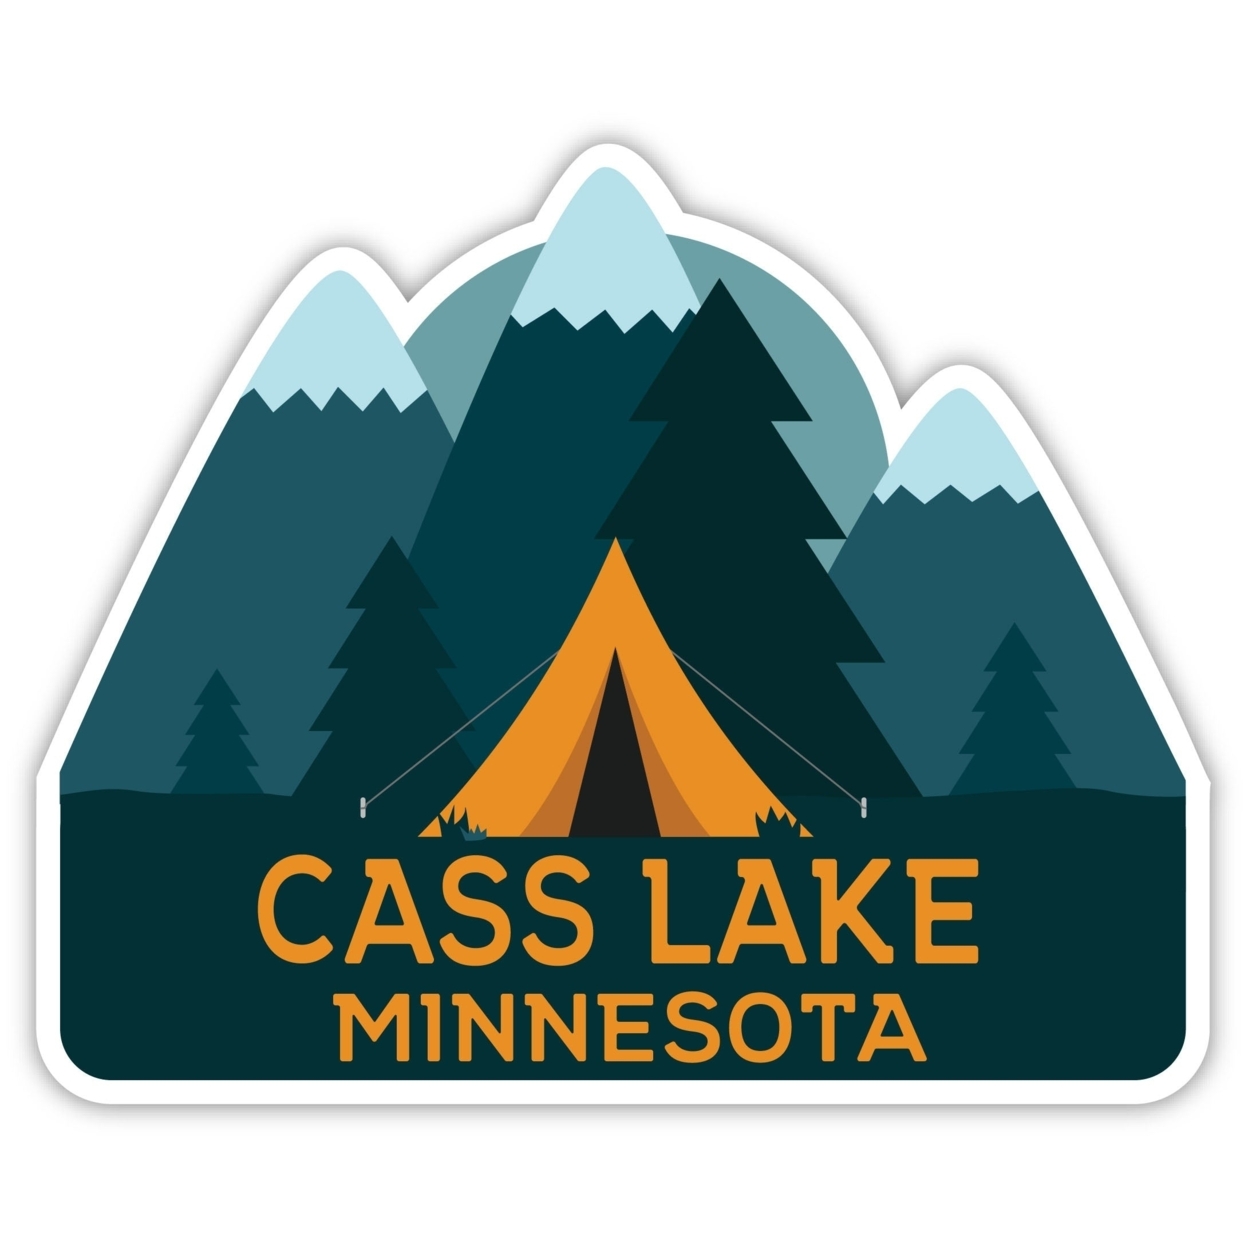 Cass Lake Minnesota Souvenir Decorative Stickers (Choose Theme And Size) - 4-Pack, 12-Inch, Tent